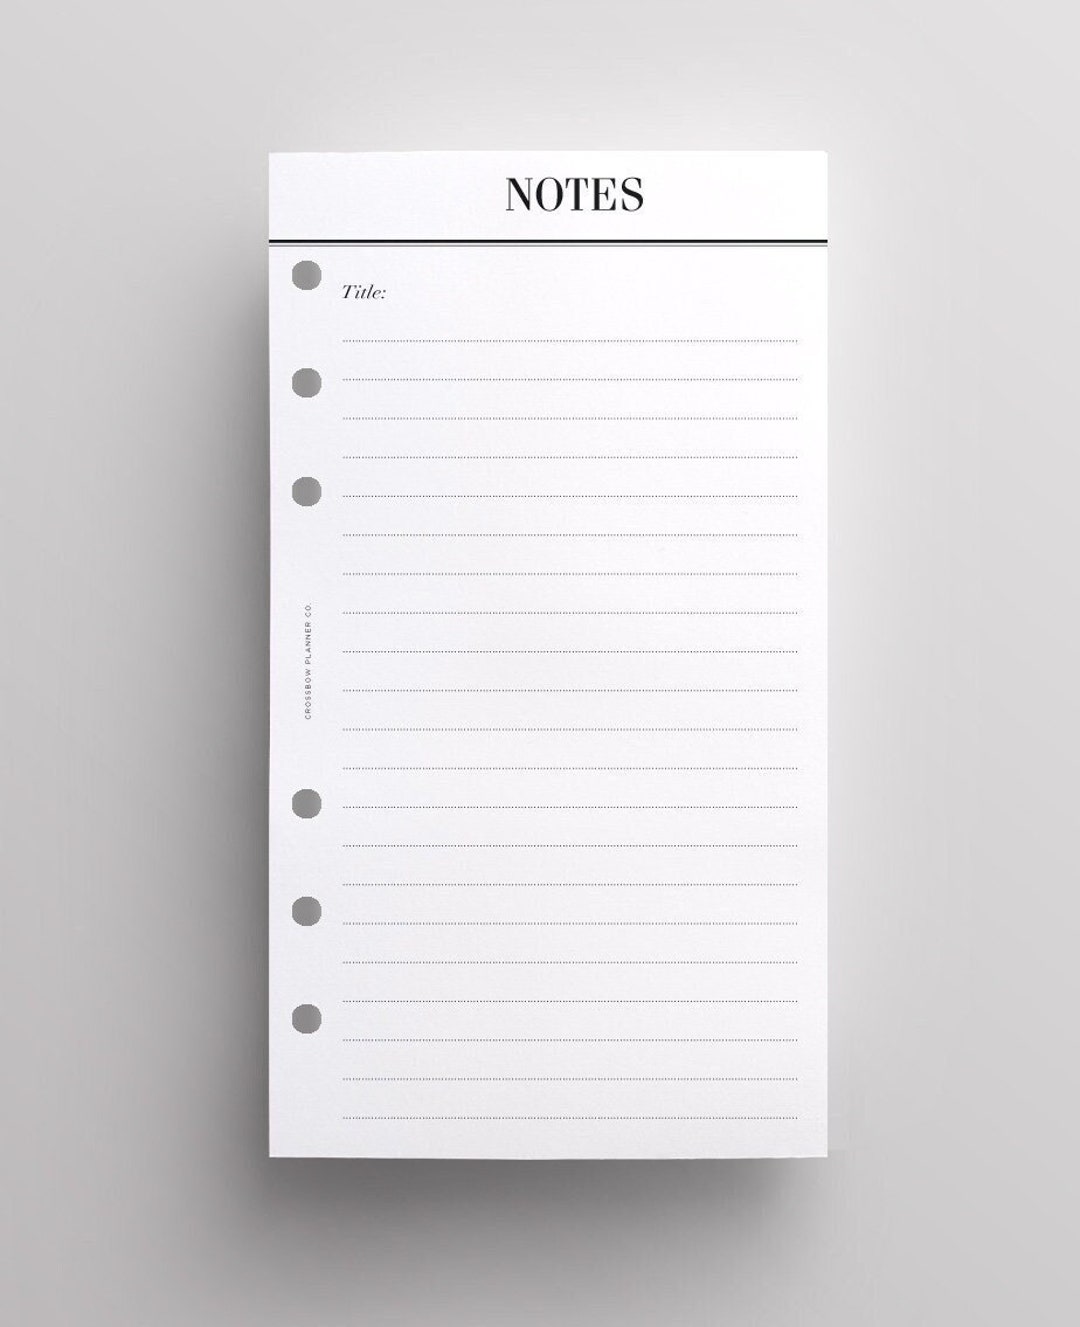  Personal Size Notes Insert with Simple Lines Spaced 1/4,  Sized and Punched with 6 Holes for Personal Size Notebooks by Filofax,  Louis Vuitton (PM), Kikki-K, and Others. (3.7 x 6.75) 